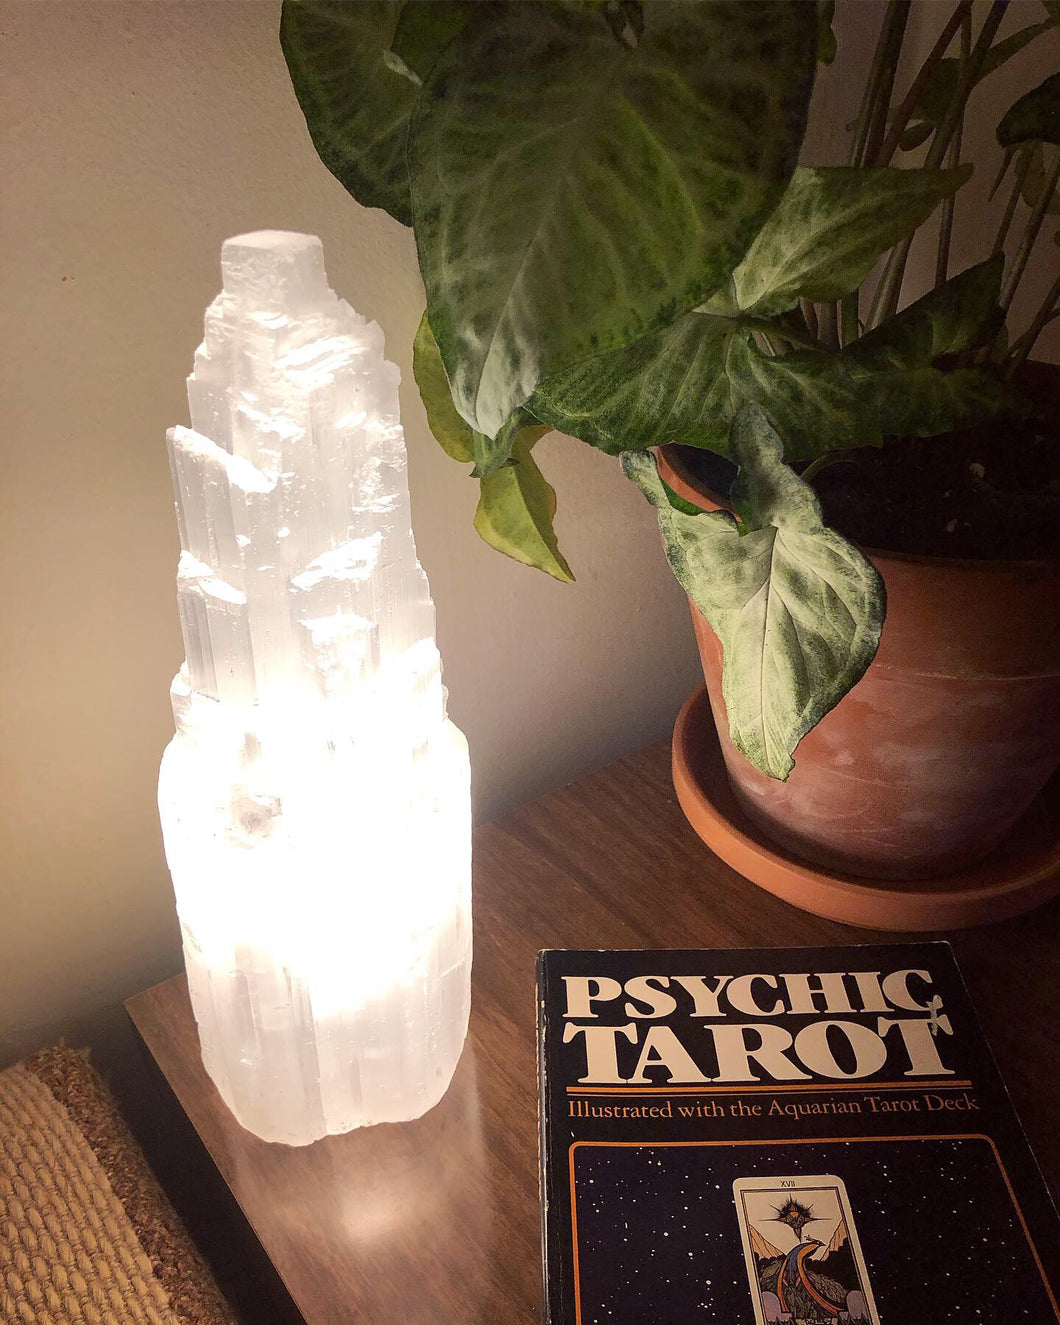 Large selenite tower lamp stands lit up next to arrowhead plant and Psychic Tarot book on midcentury side table.